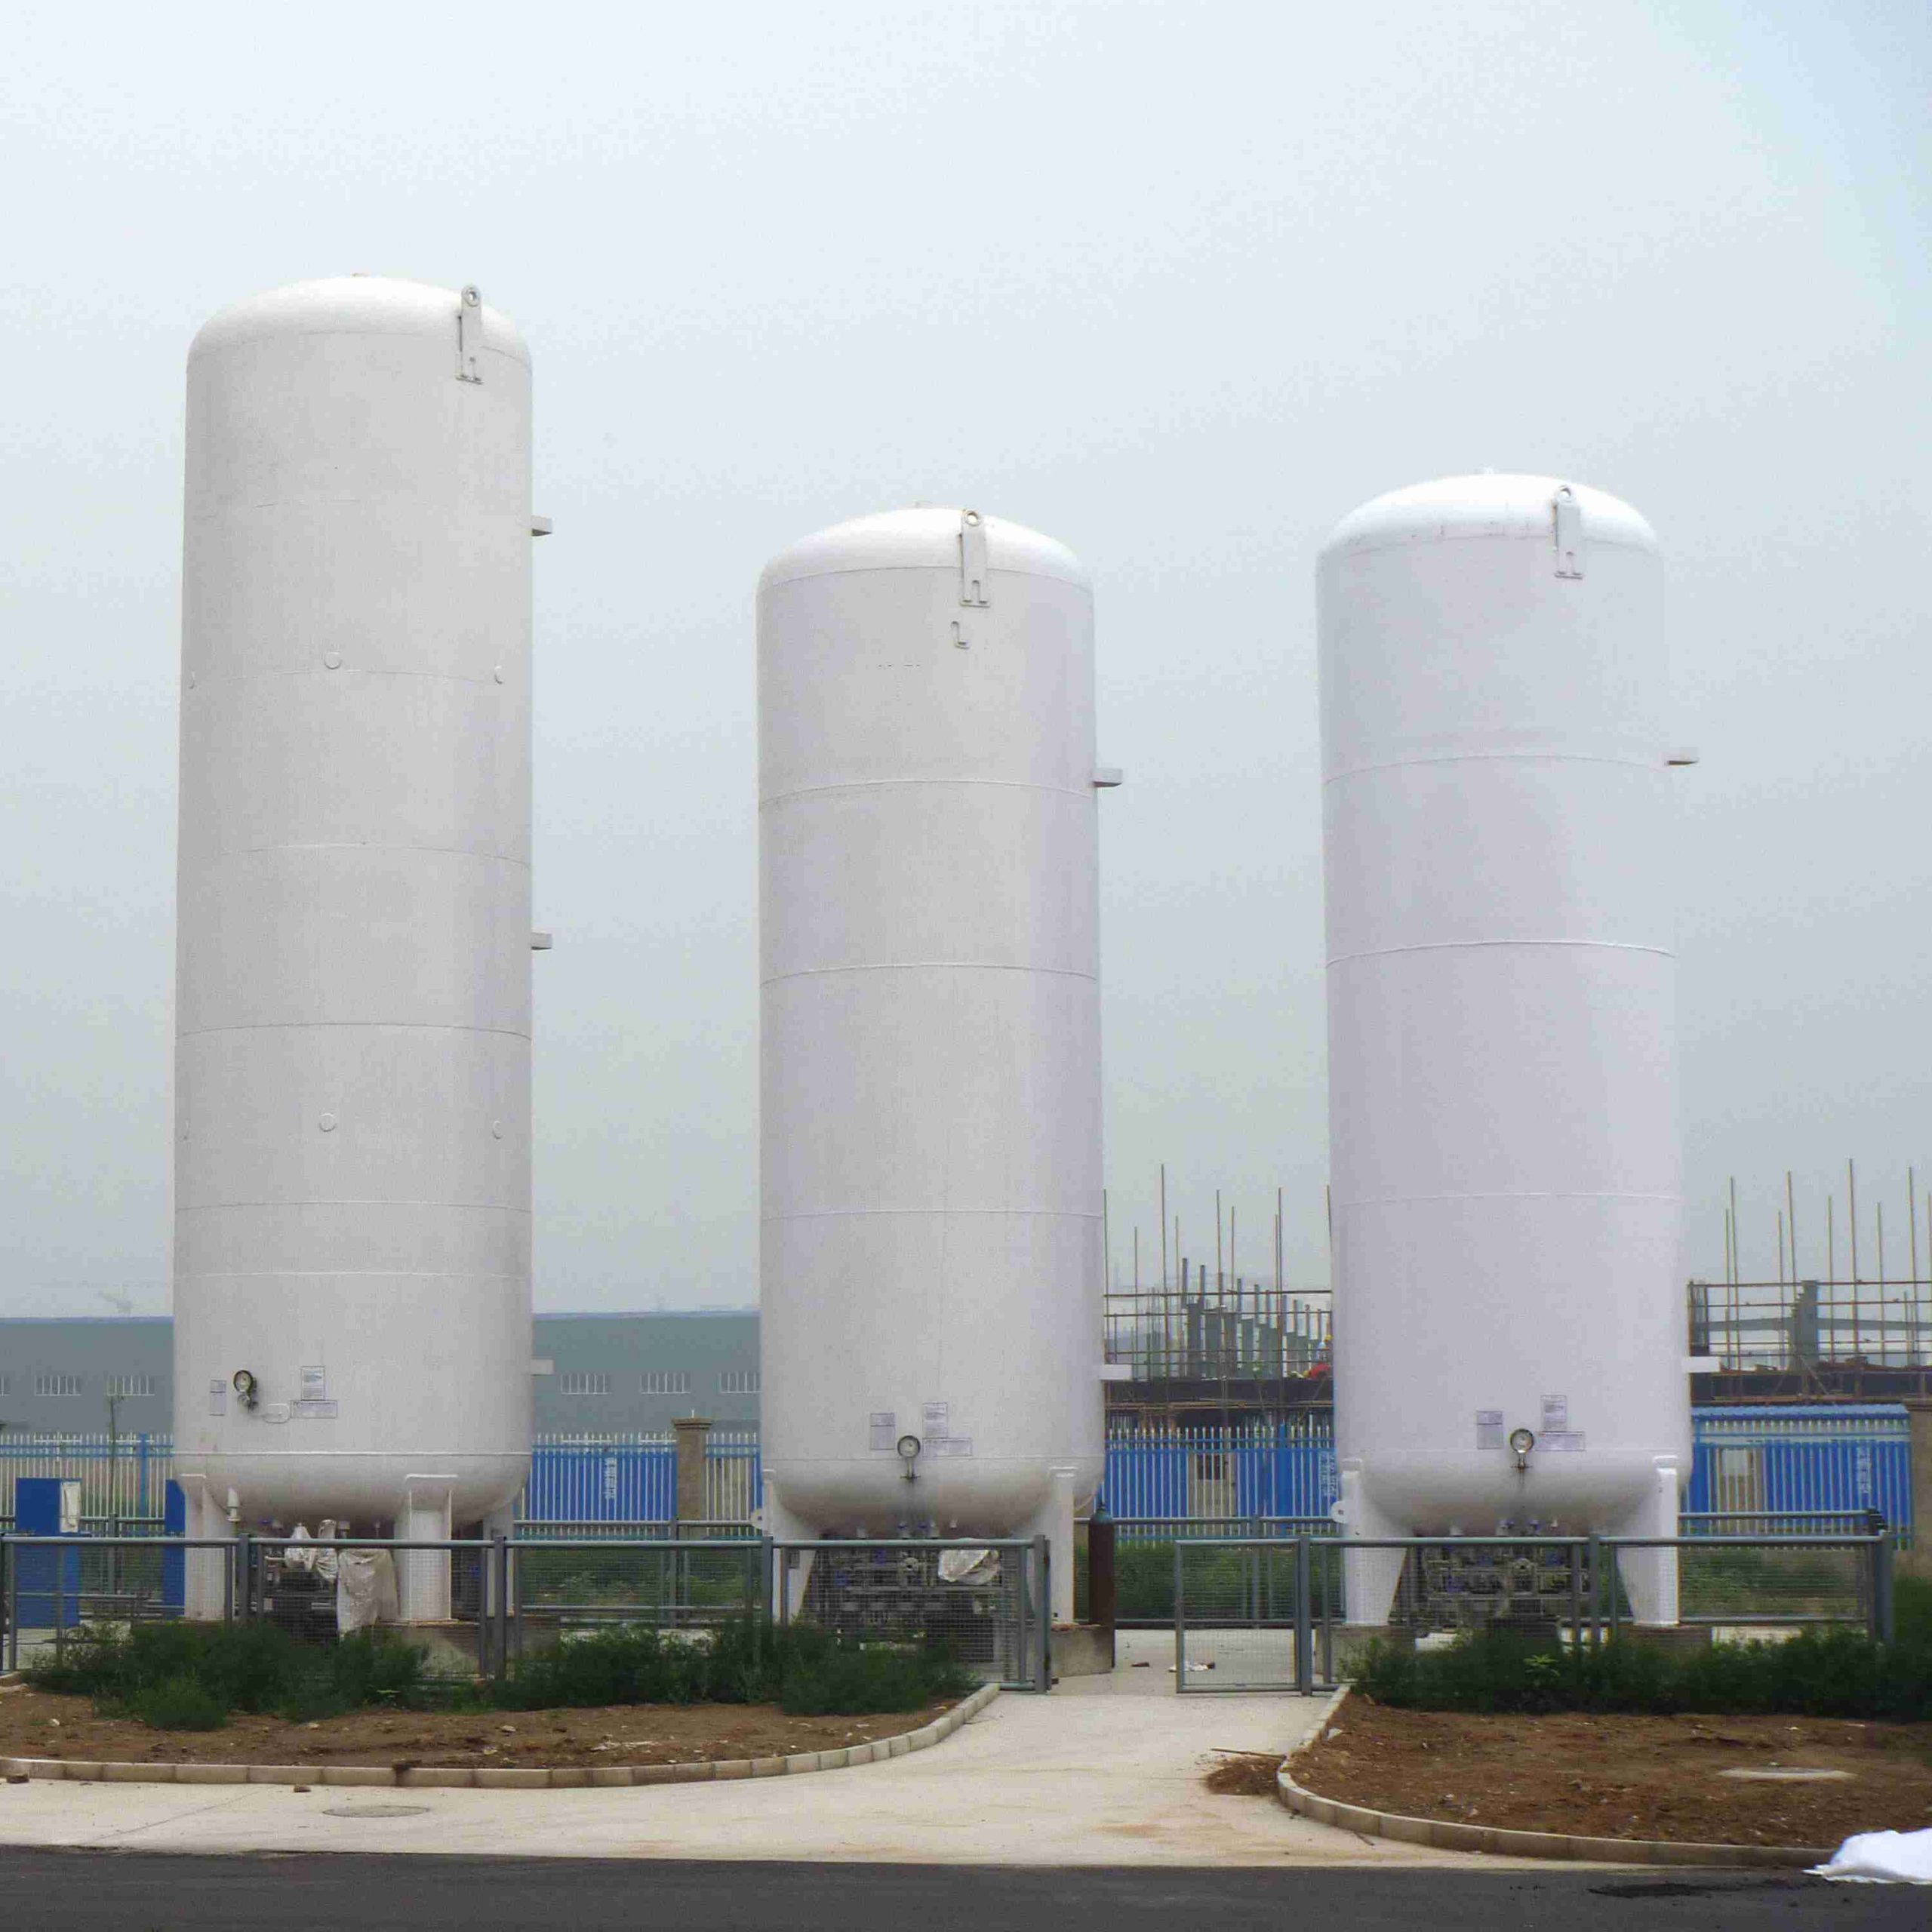 The outer surface of the cryogenic storage tank should be inspected regularly